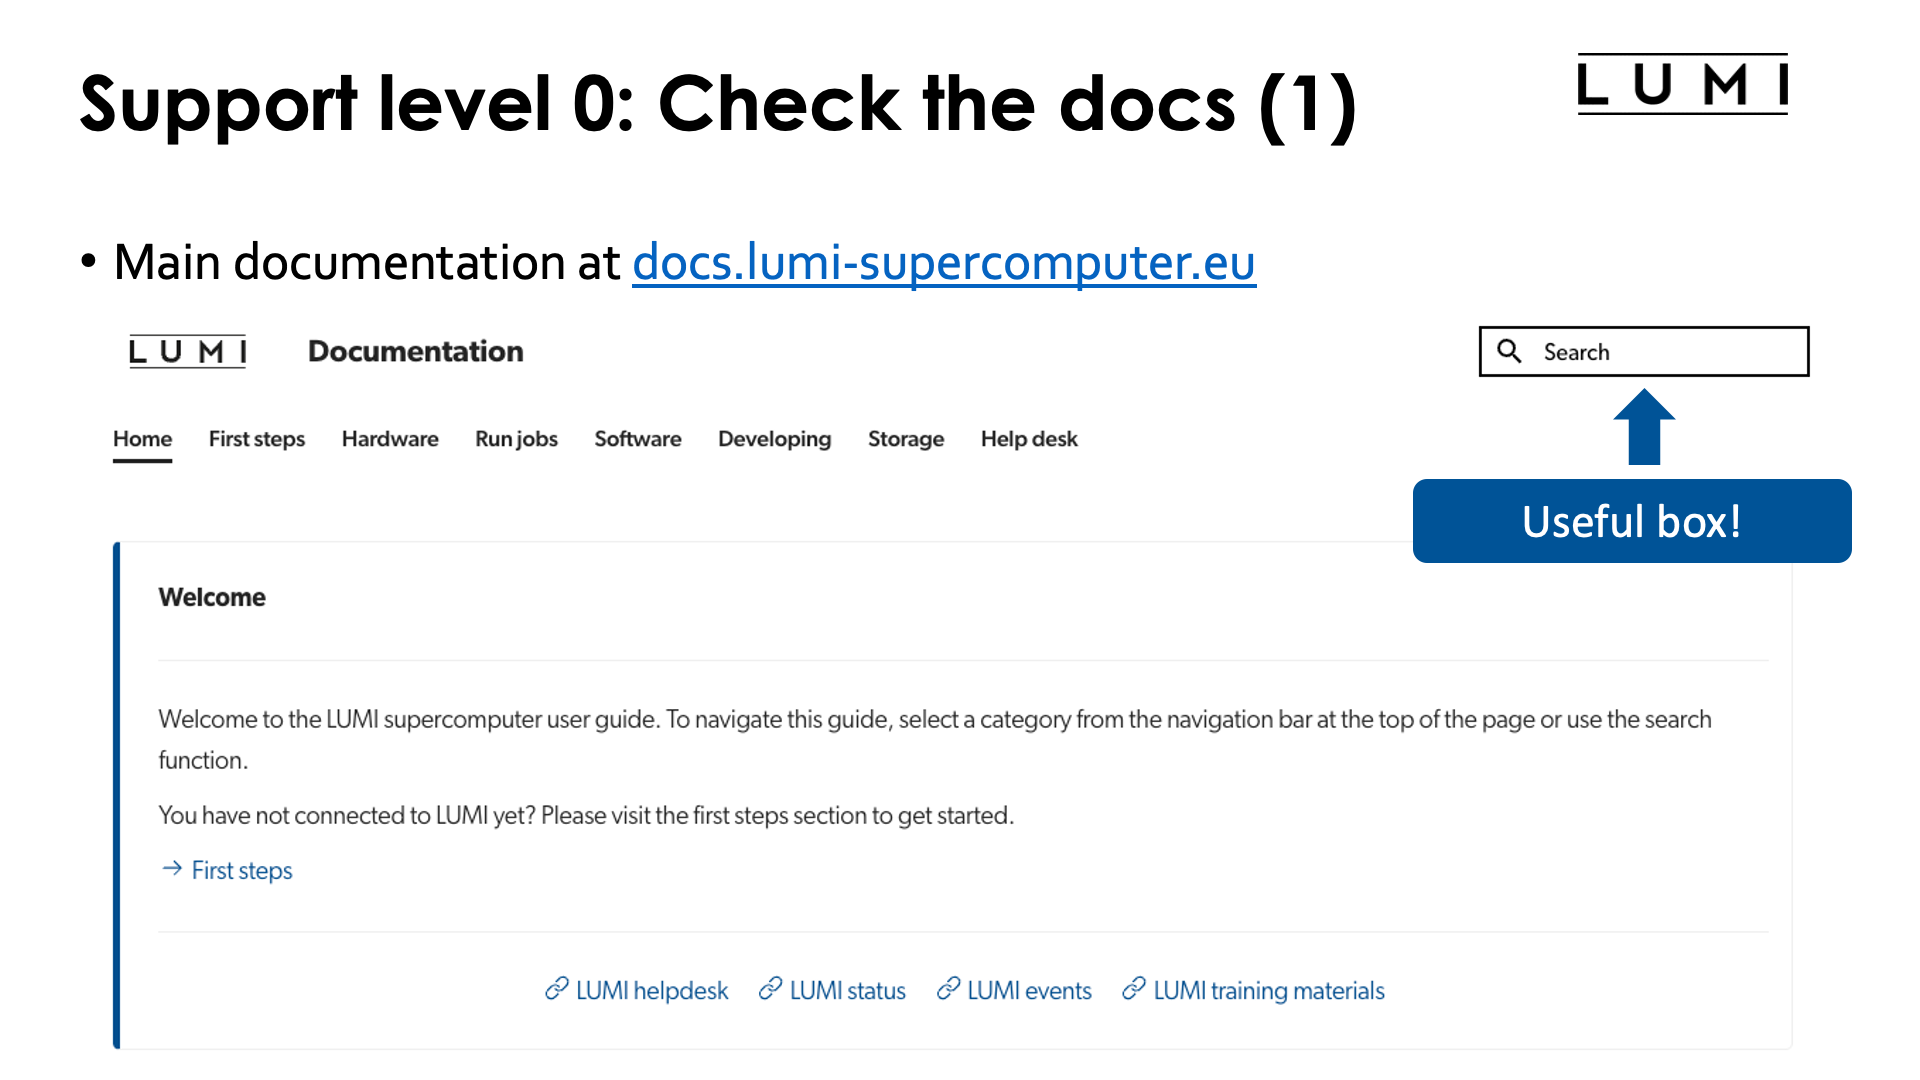 L0 support: Check the docs! (1)